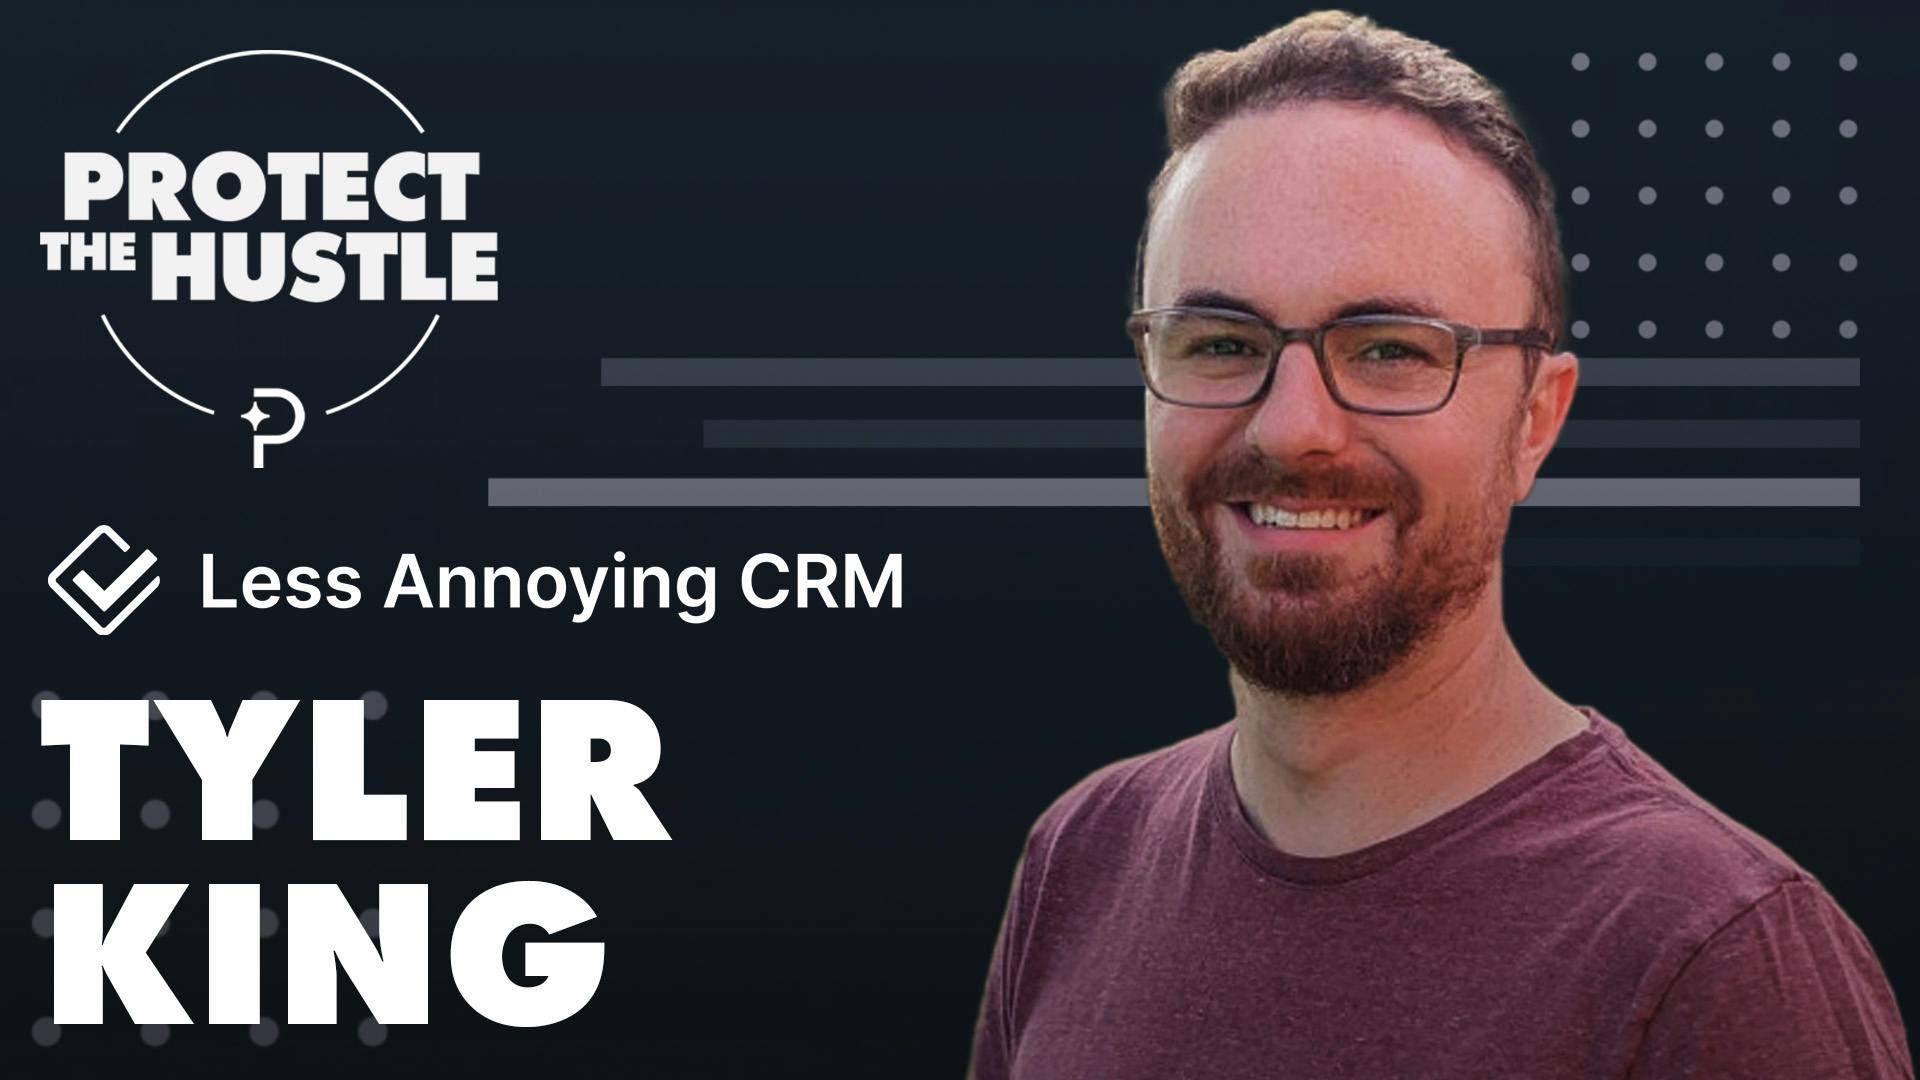 Protect the Hustle Thumbnail featuring Less Annoying CRM's Tyler King